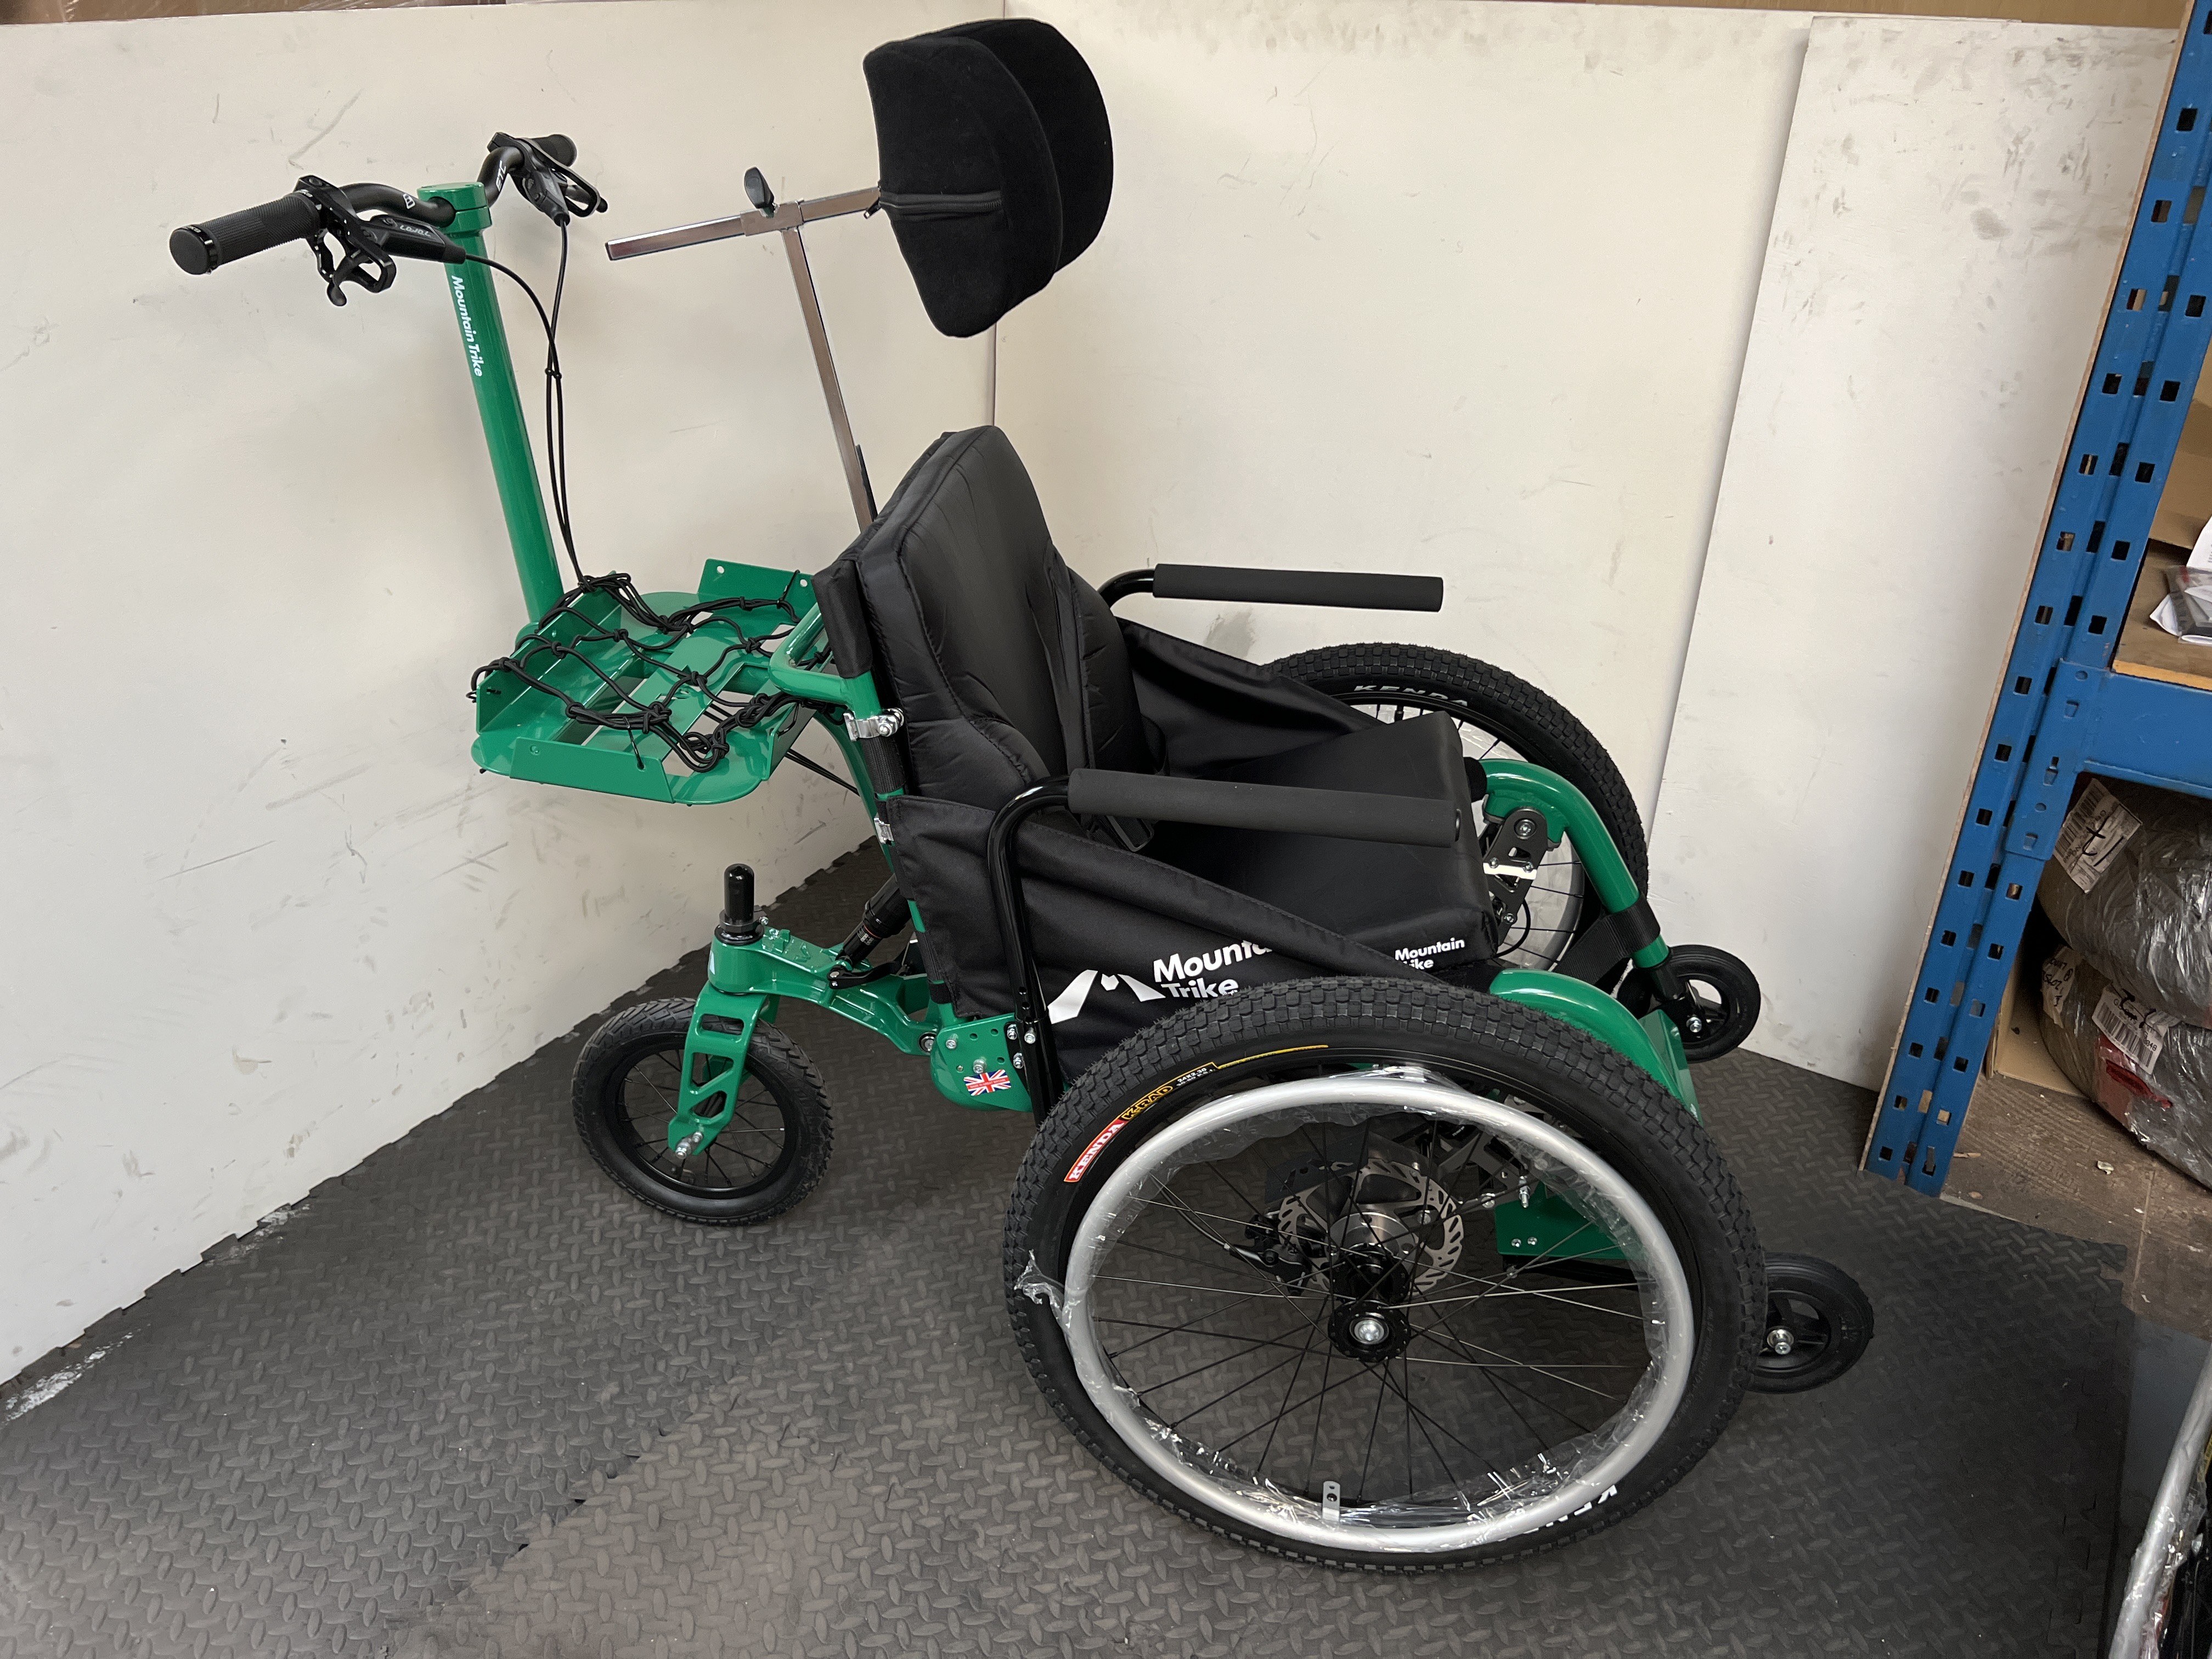 Lacock National Trust adds all terrain wheelchairs to their fleet